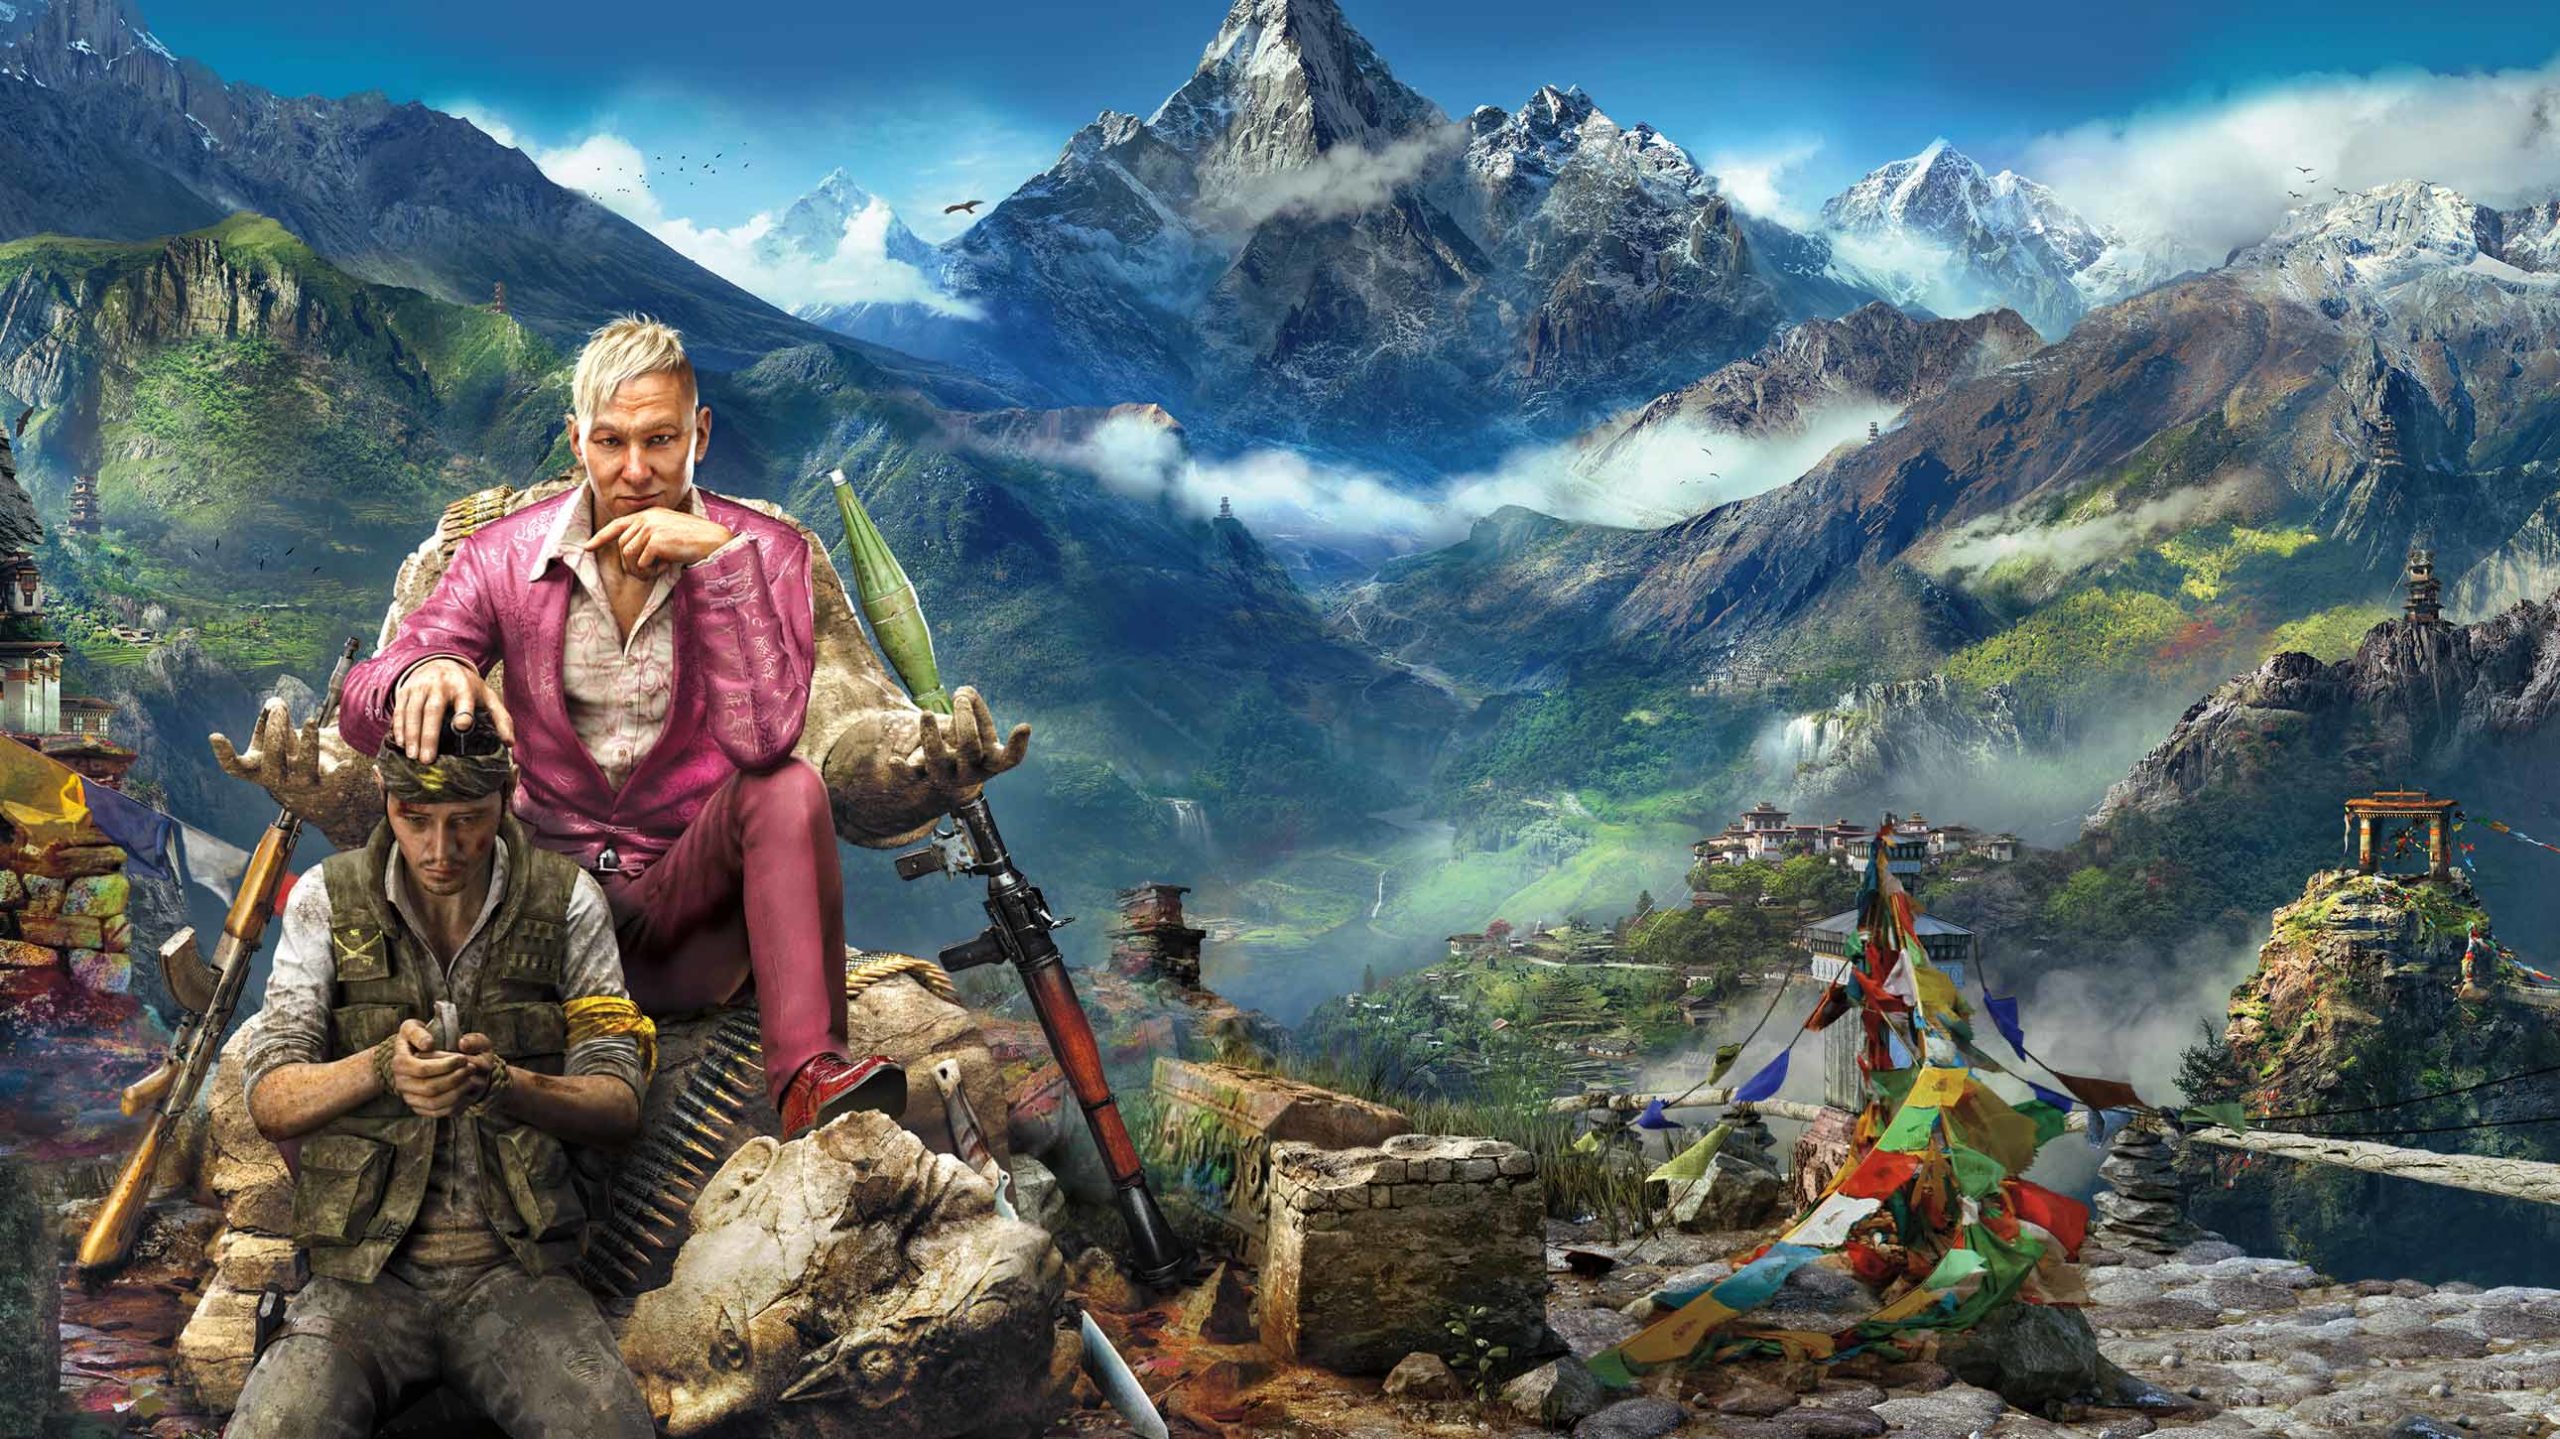 Diesel productv2 far cry 4 home FC4 STD Store Landscape 2580x1450 2580x1450 d1f404cc7a8404f24f511a0159d2874560e4b522 scaled Download Far cry 4 for PC